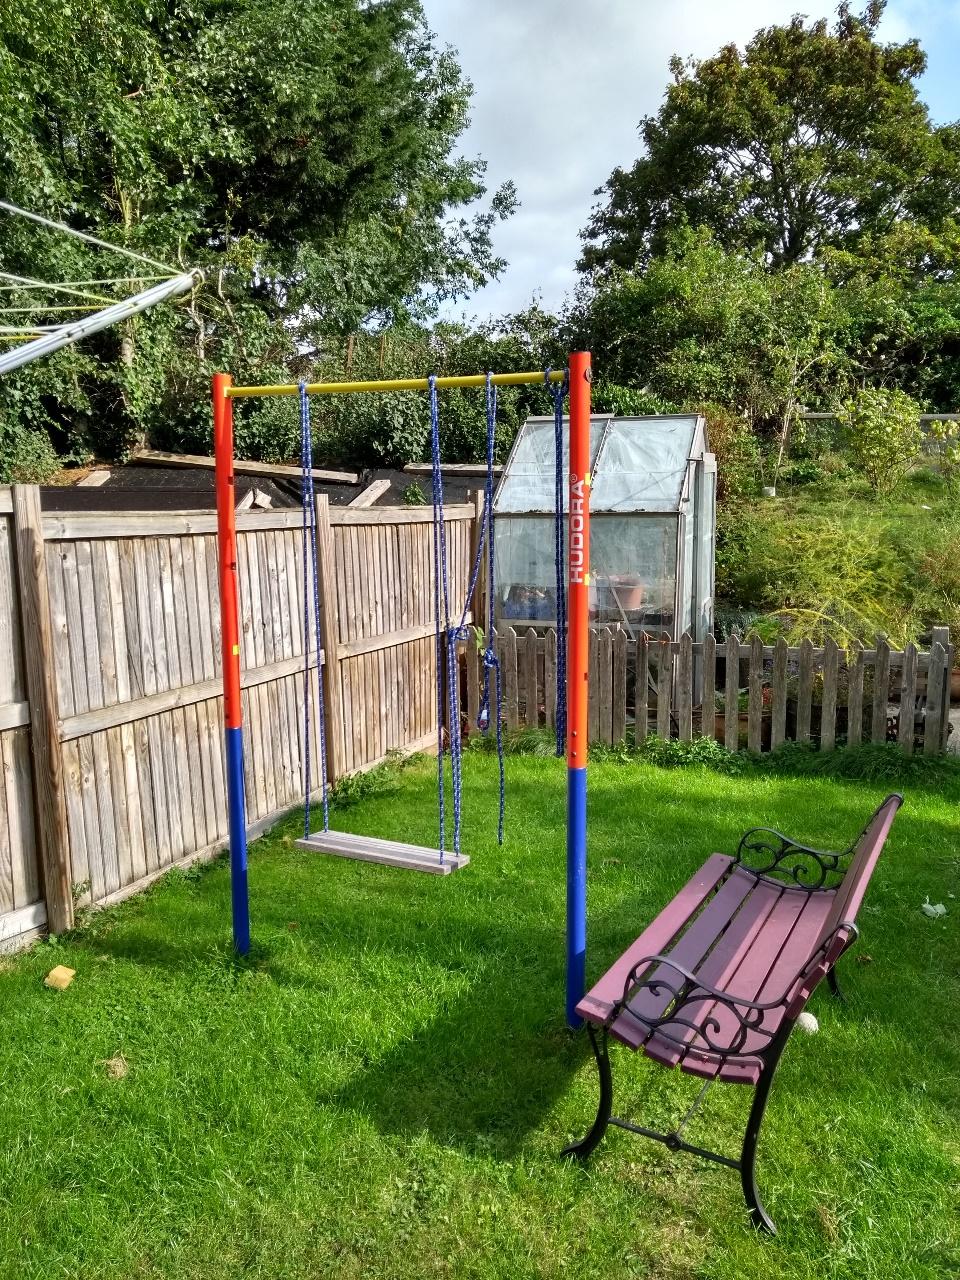 A gym bar / pull up bar outdoors, in the middle of a lawn.